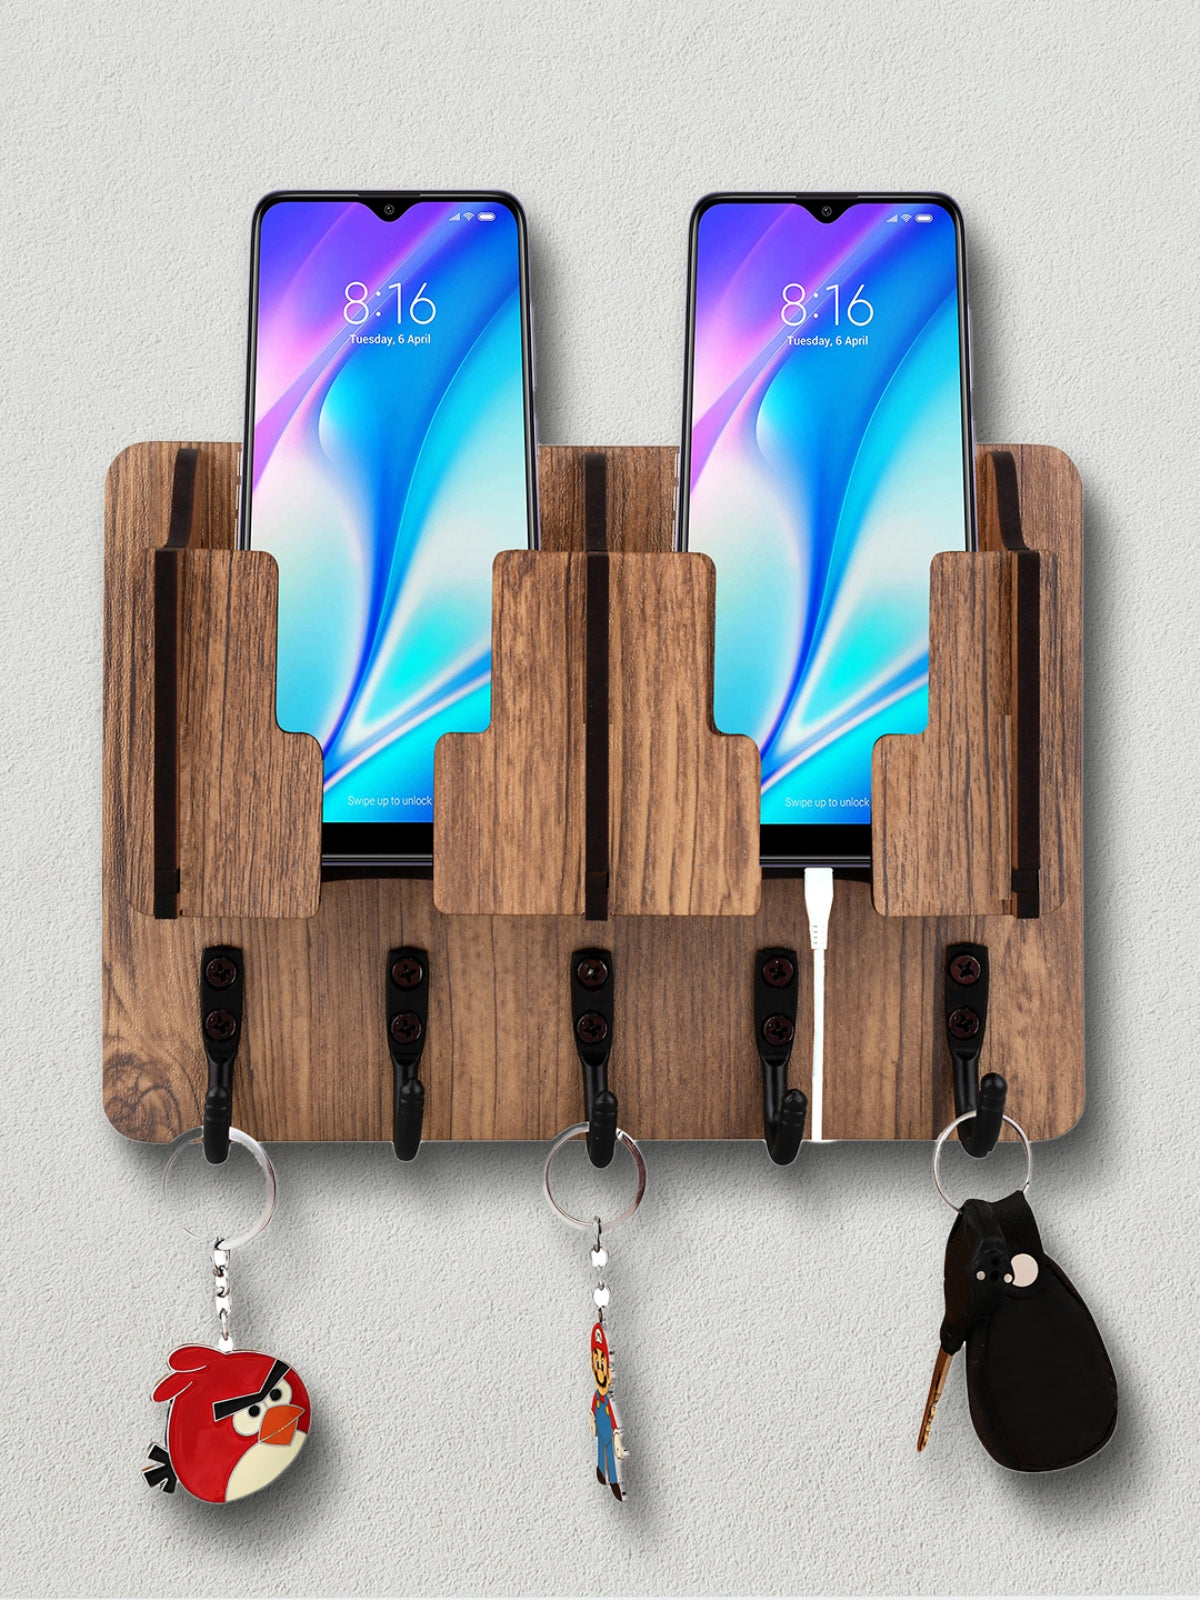 Wooden Key Holder With 2 Mobile Stand Holder For Home & Office Wall Decorative